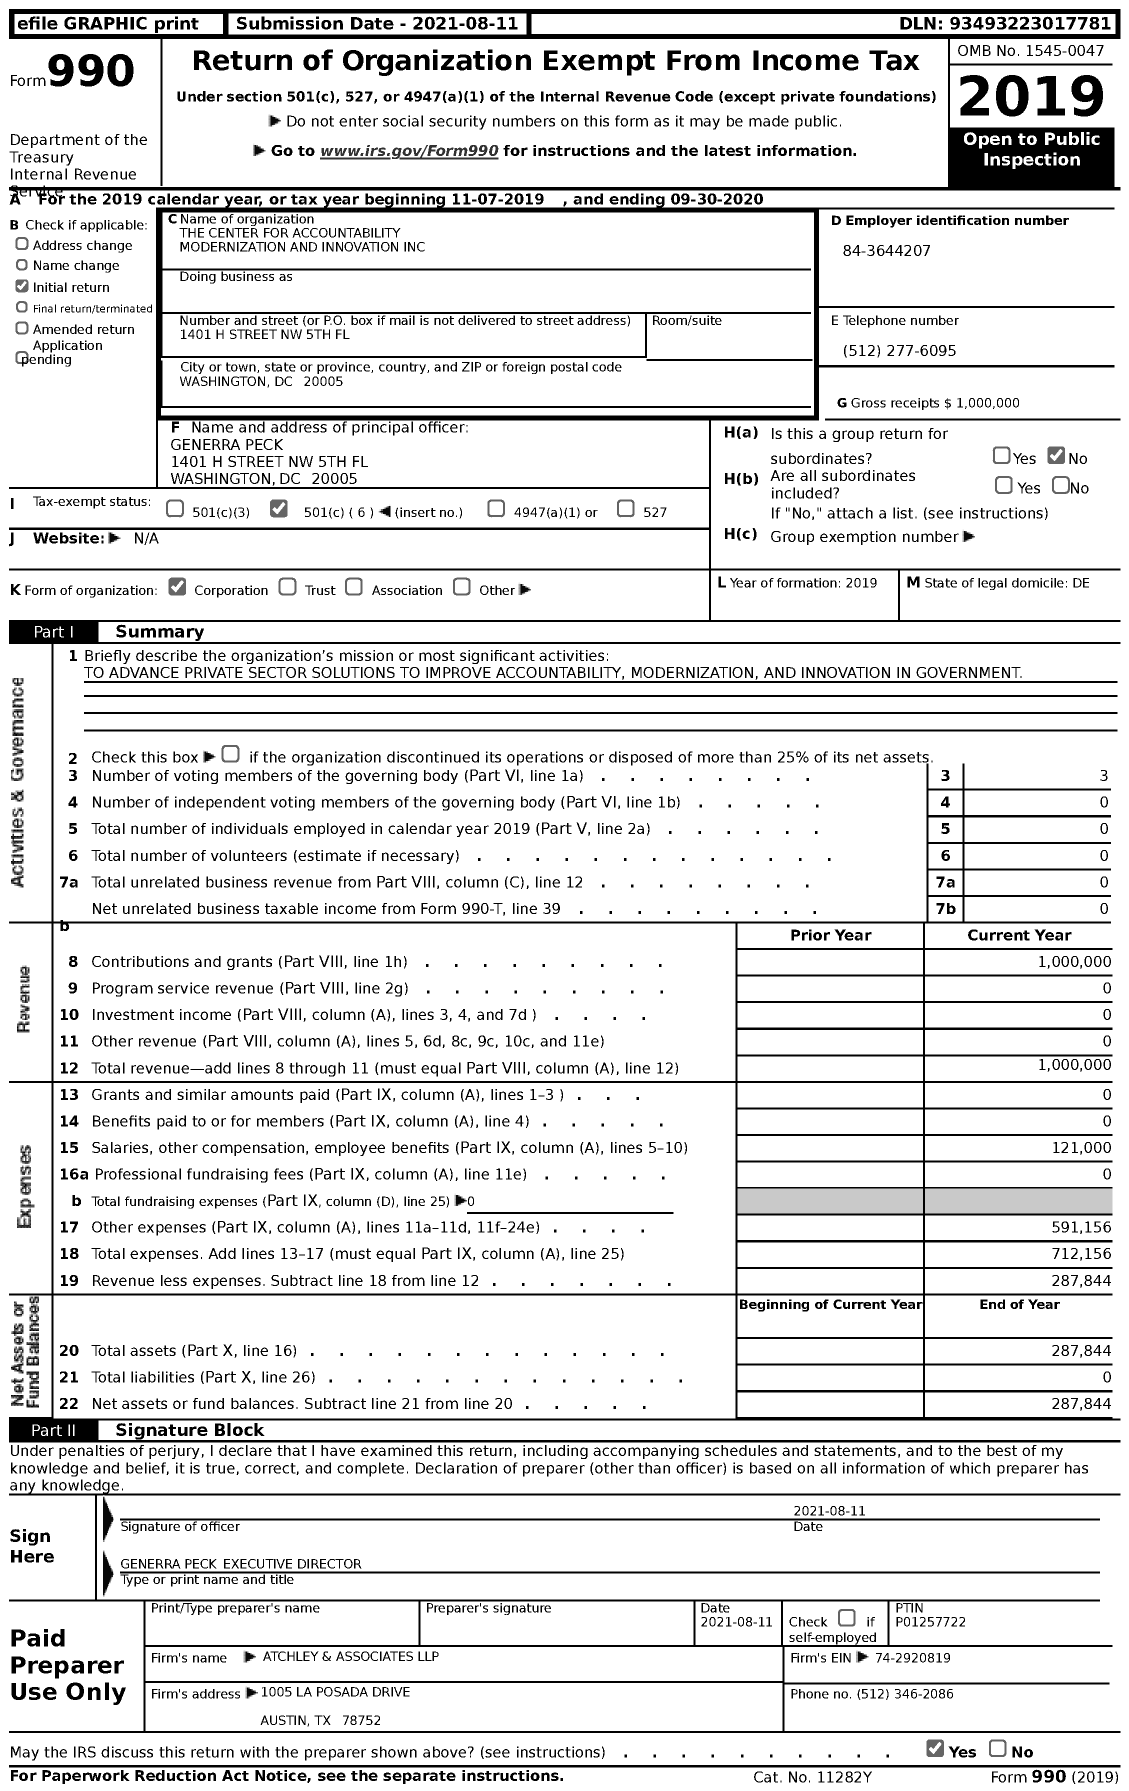 Image of first page of 2019 Form 990 for The Center for Accountability Modernization and Innovation